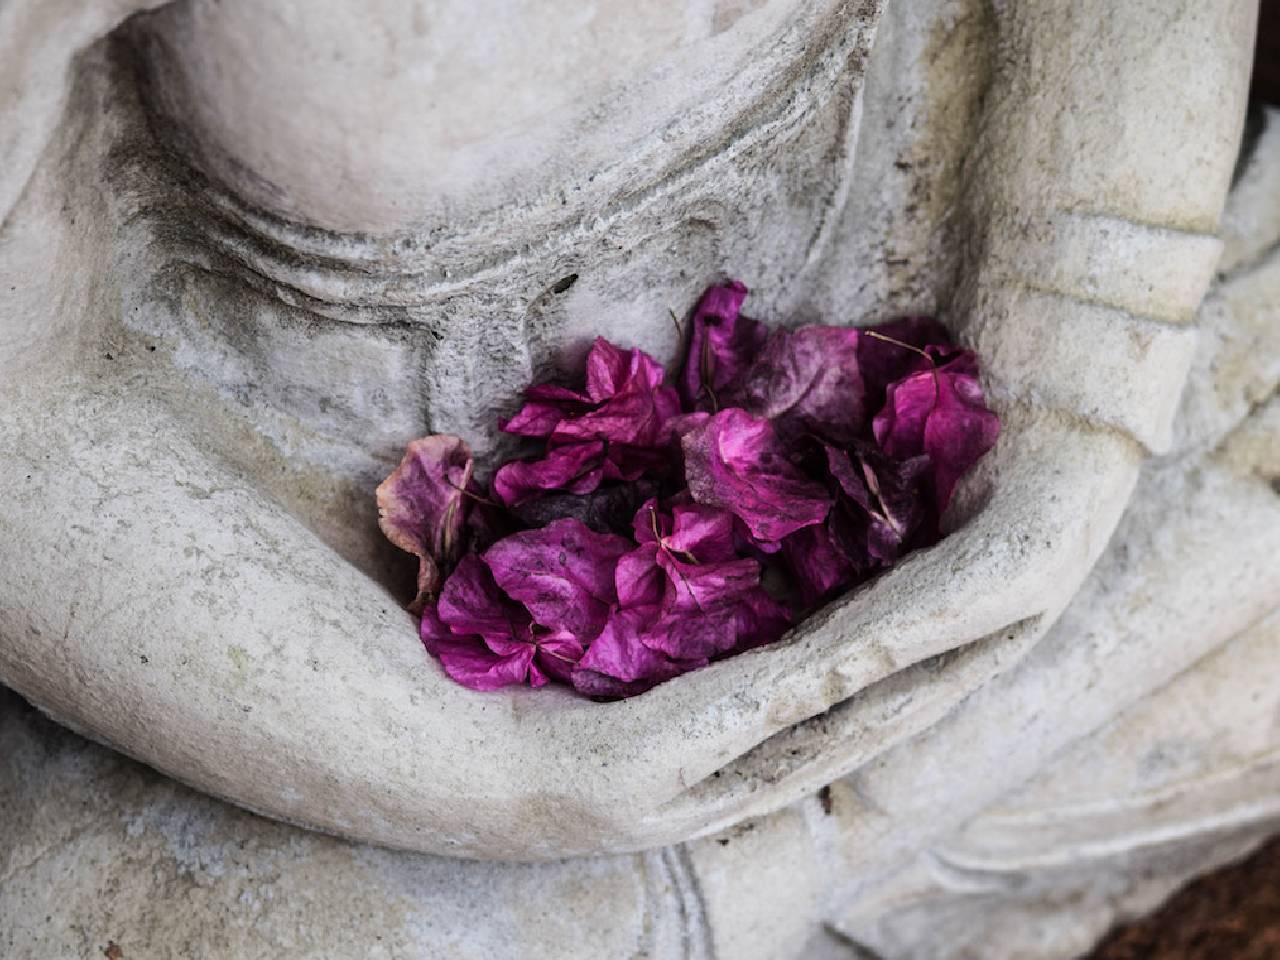 seated statue with flower petals in its hands